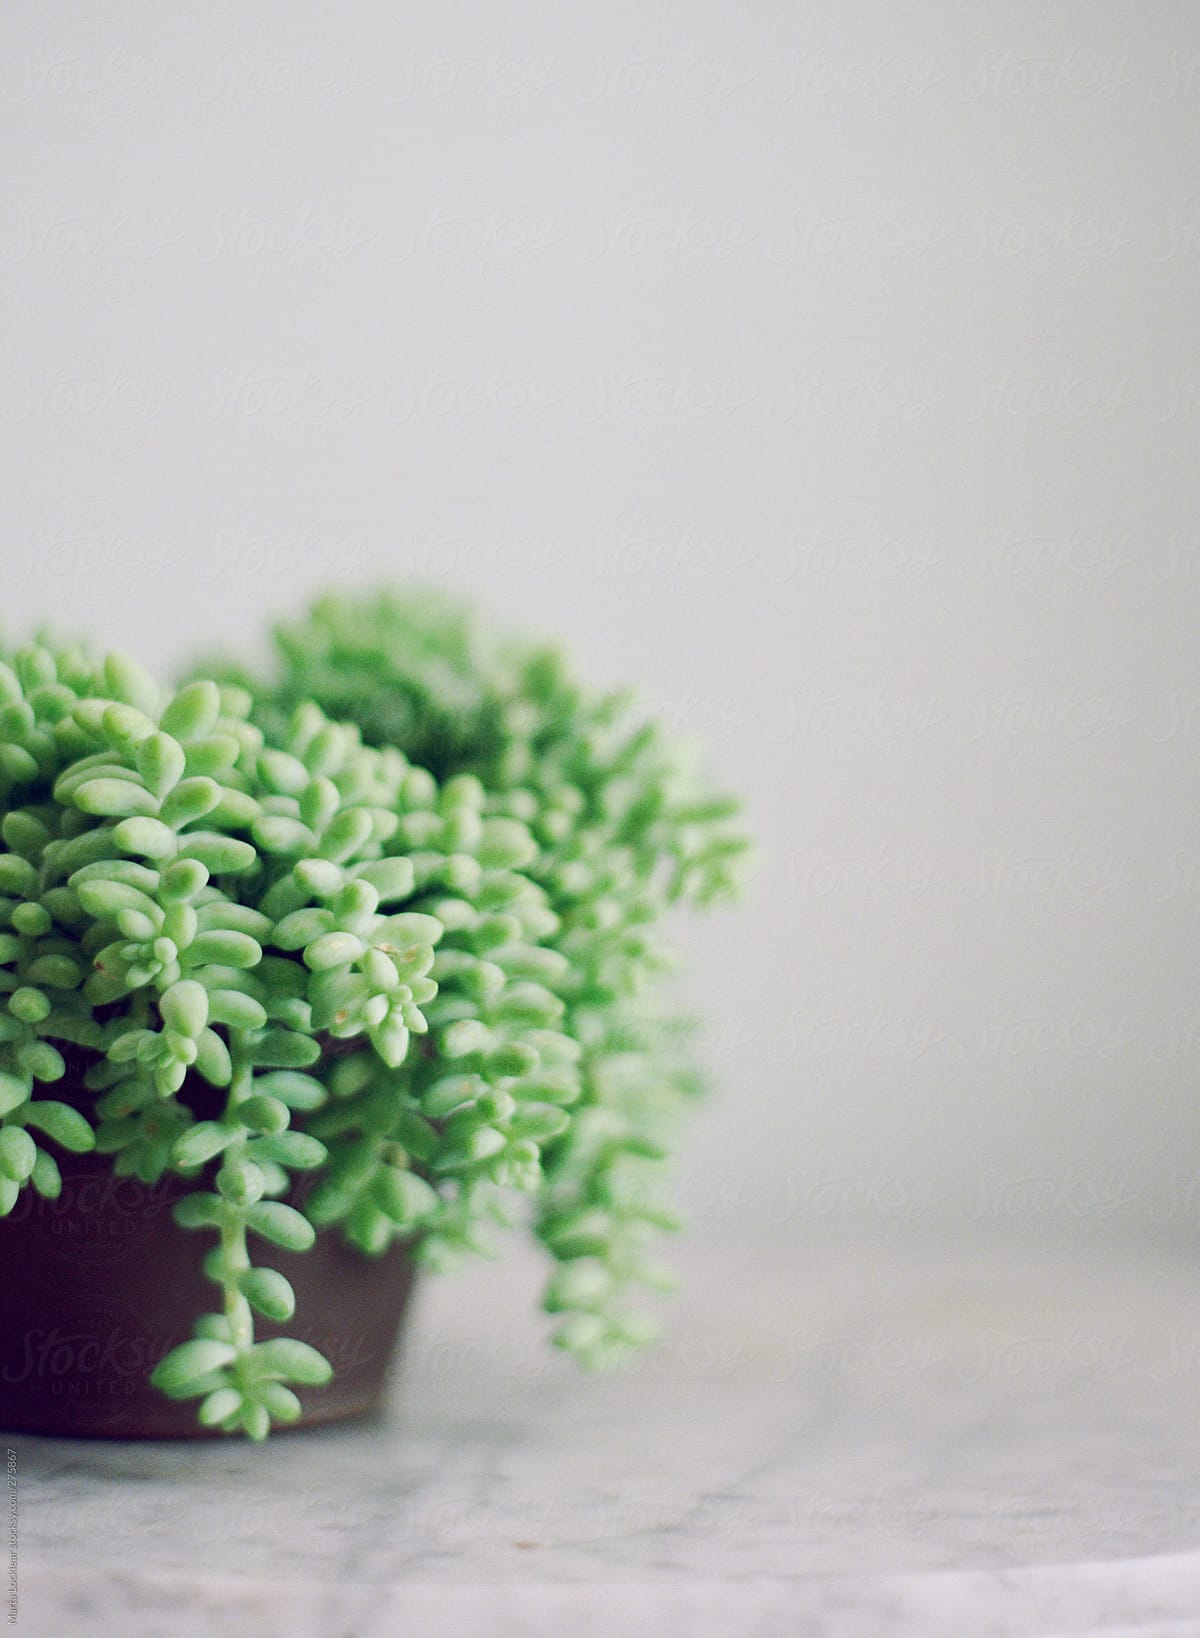 Burros Tail succulent plant on carrera marble table